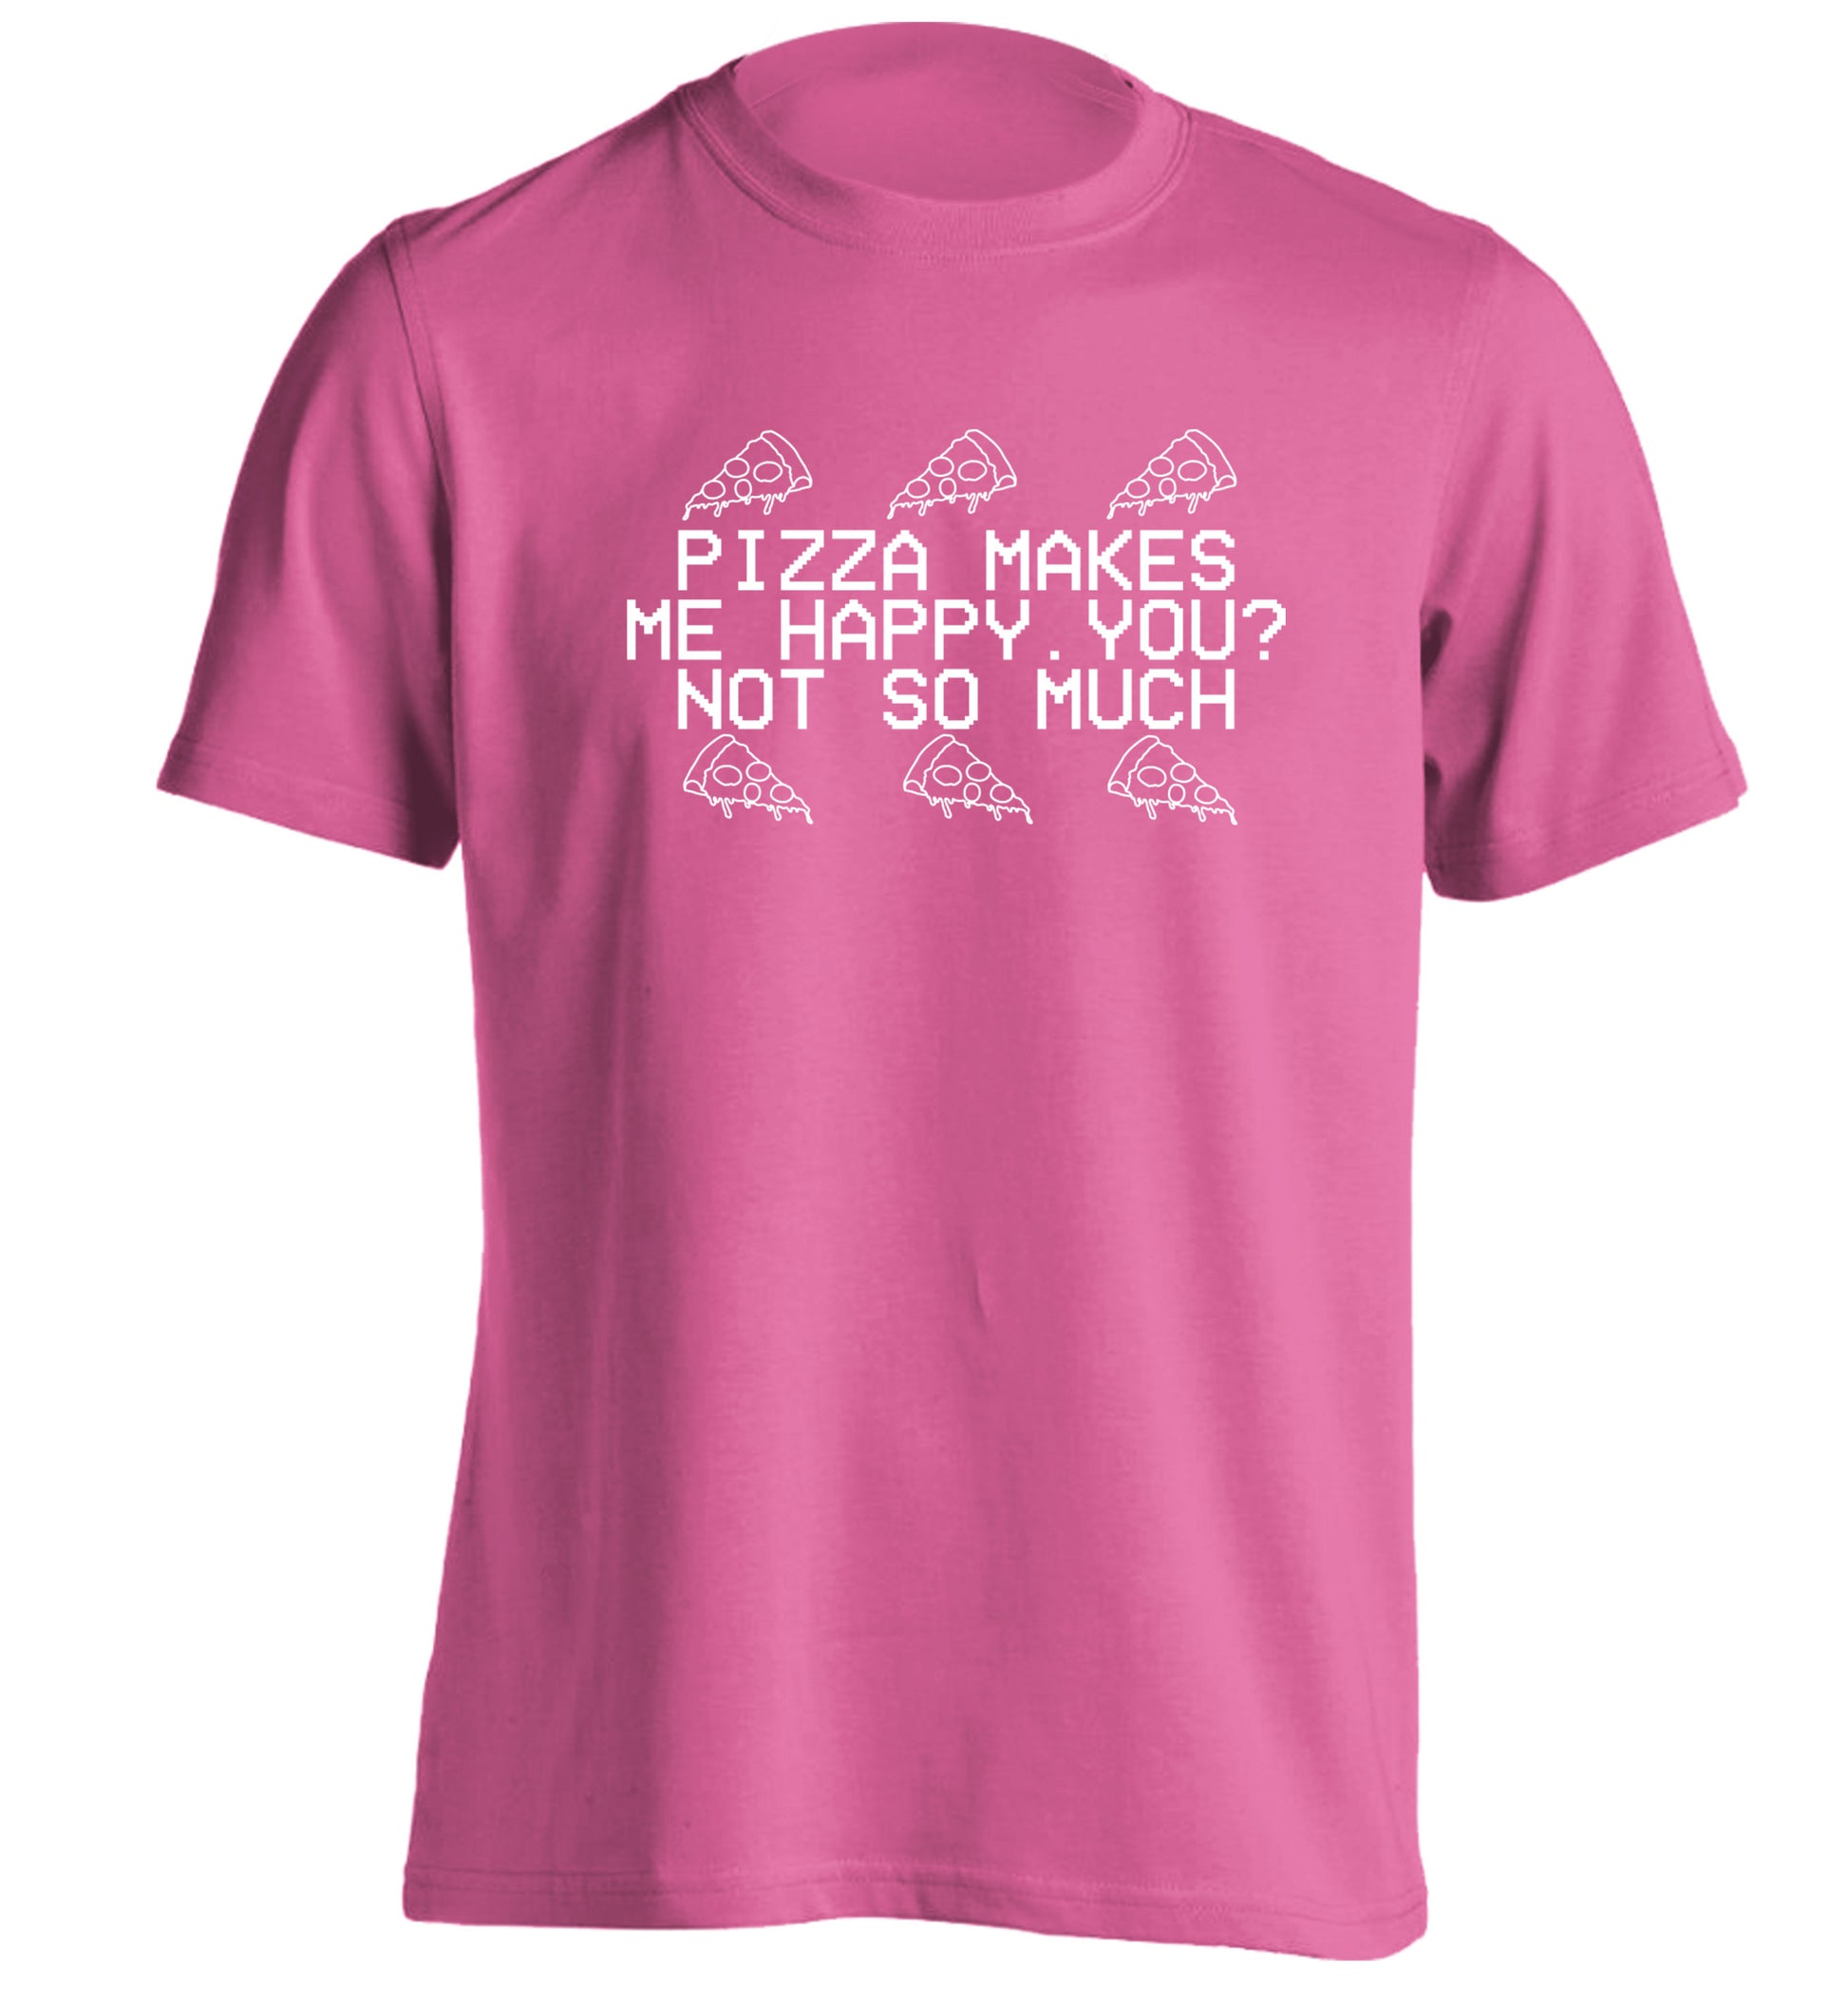 Pizza makes me happy, You? Not so much adults unisex pink Tshirt 2XL